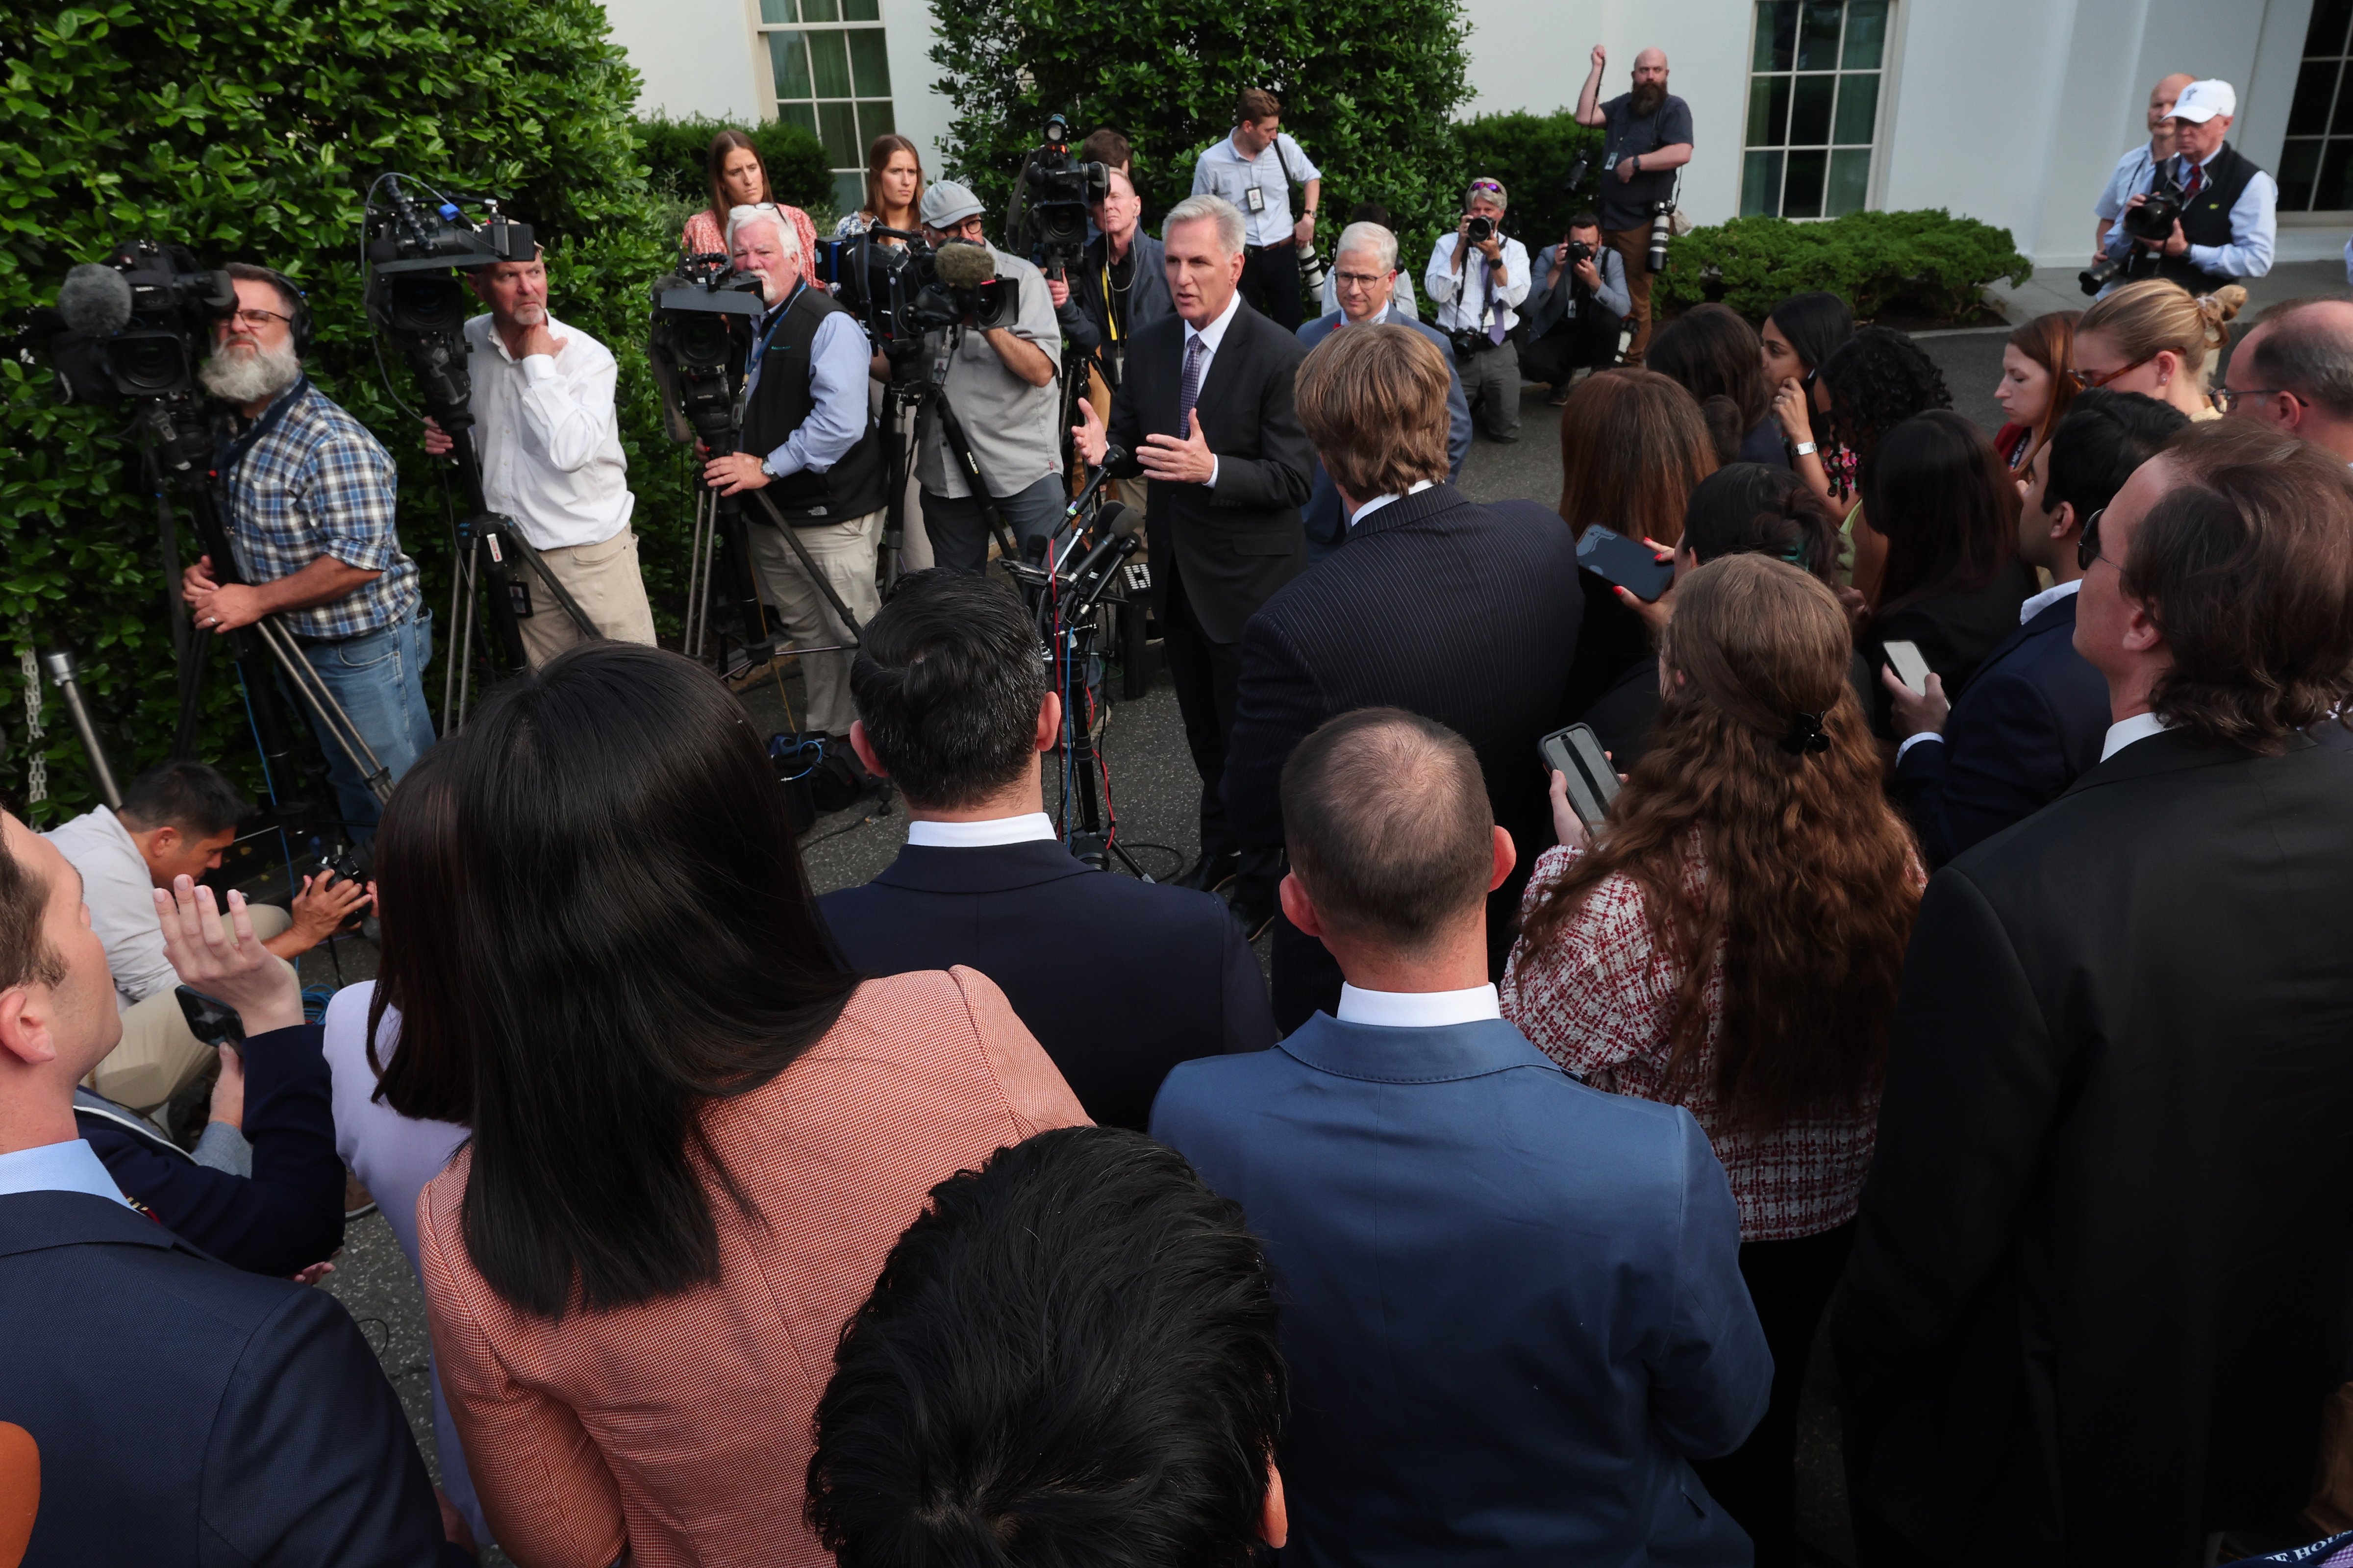 US Speaker of the House Kevin McCarthy (R-CA), joined by Rep. Patrick McHenry (R-NC), speaks to reporters after his meeting with US President Joe Biden at the White House on May 22, 2023.  (Alex Wong - Getty Images)